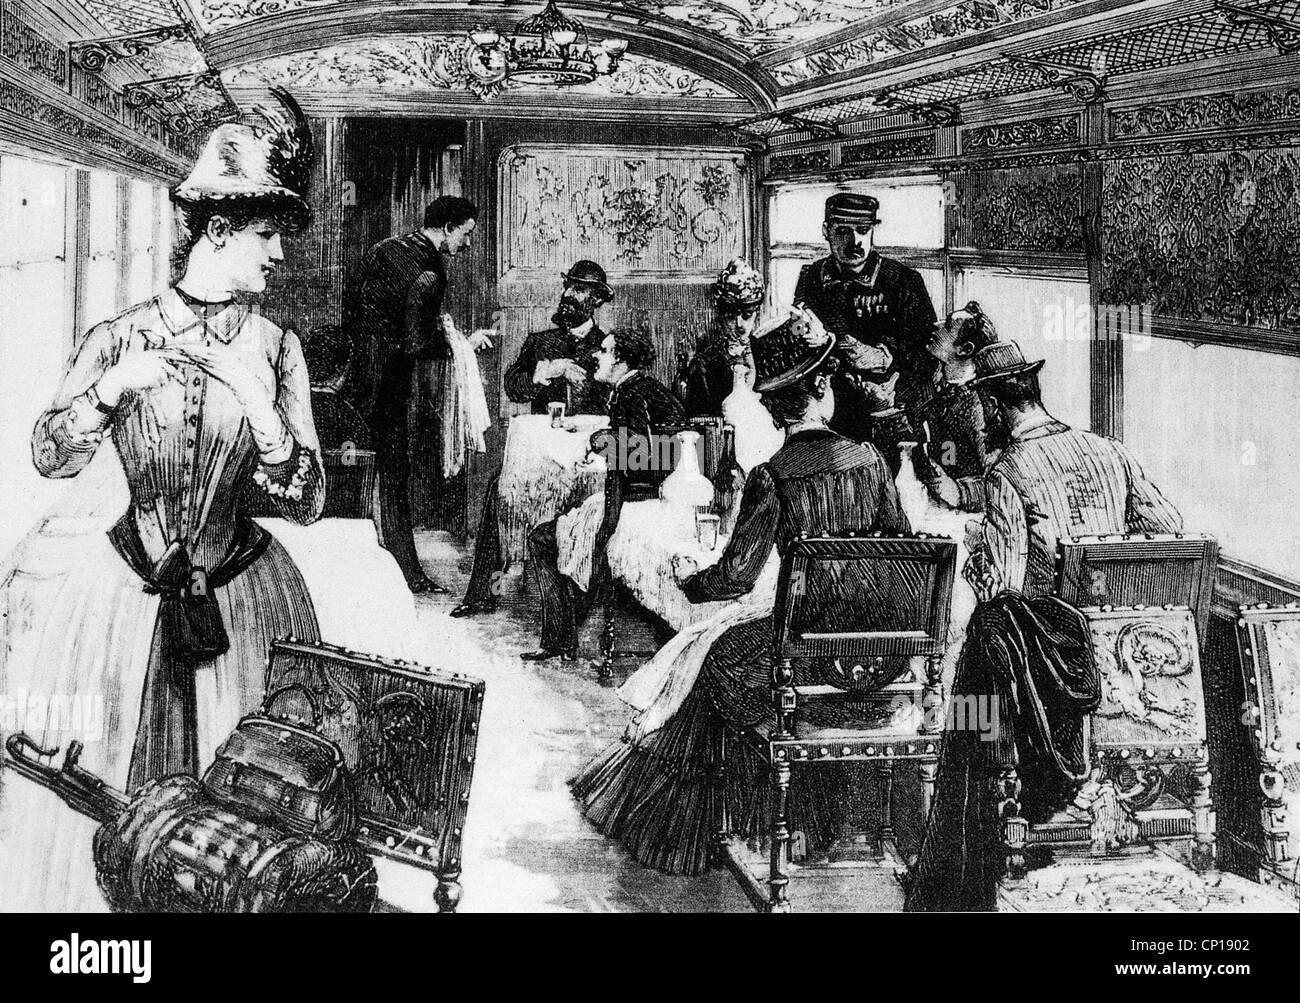 transport / transportation, railway, Orient Express, dining car, wood engraving, circa 1885, Additional-Rights-Clearences-Not Available Stock Photo